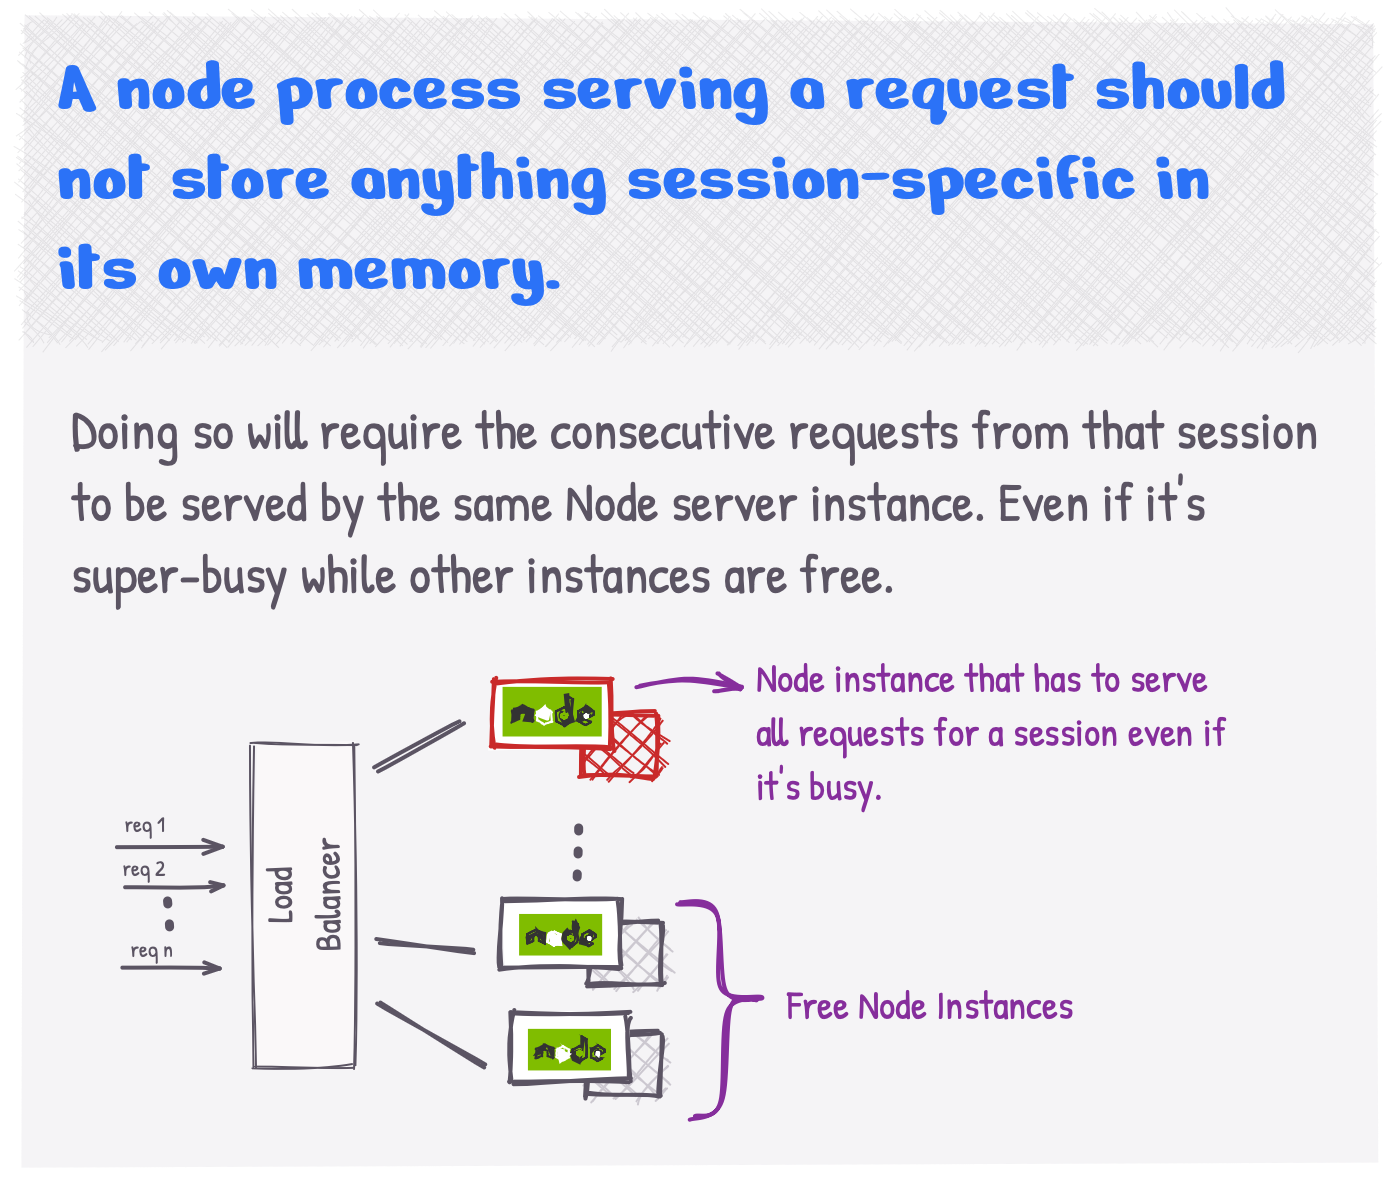 A node process should not store session-specific stuff in it's own memory